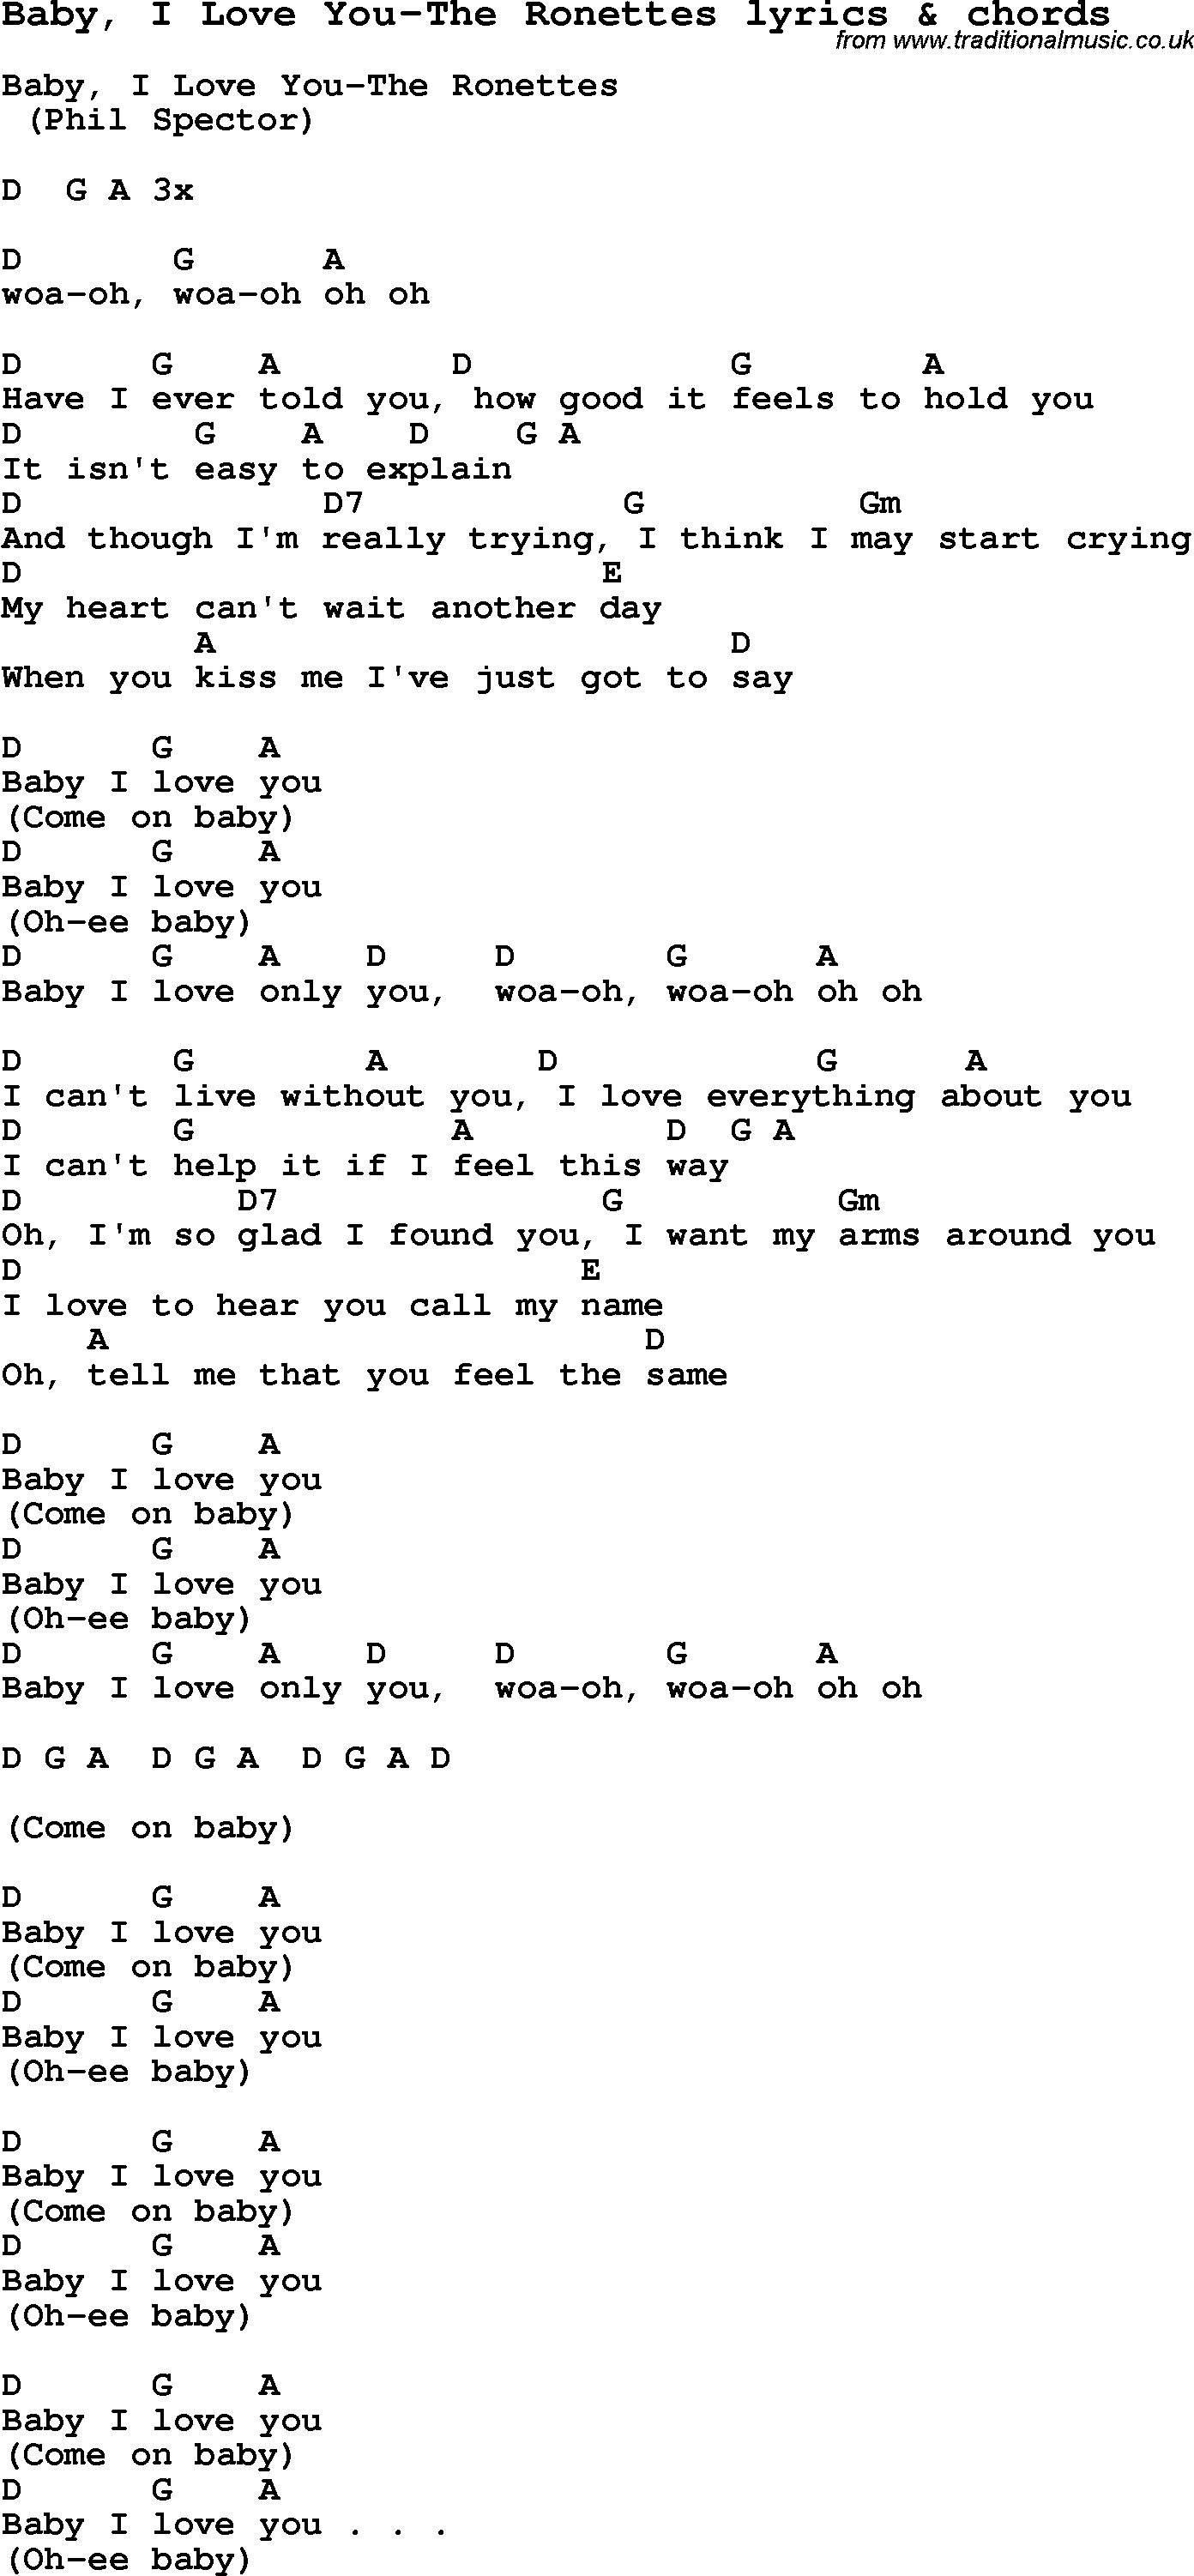 Love Song Lyrics for: Baby, I Love You-The Ronettes with chords for Ukulele, Guitar Banjo etc.